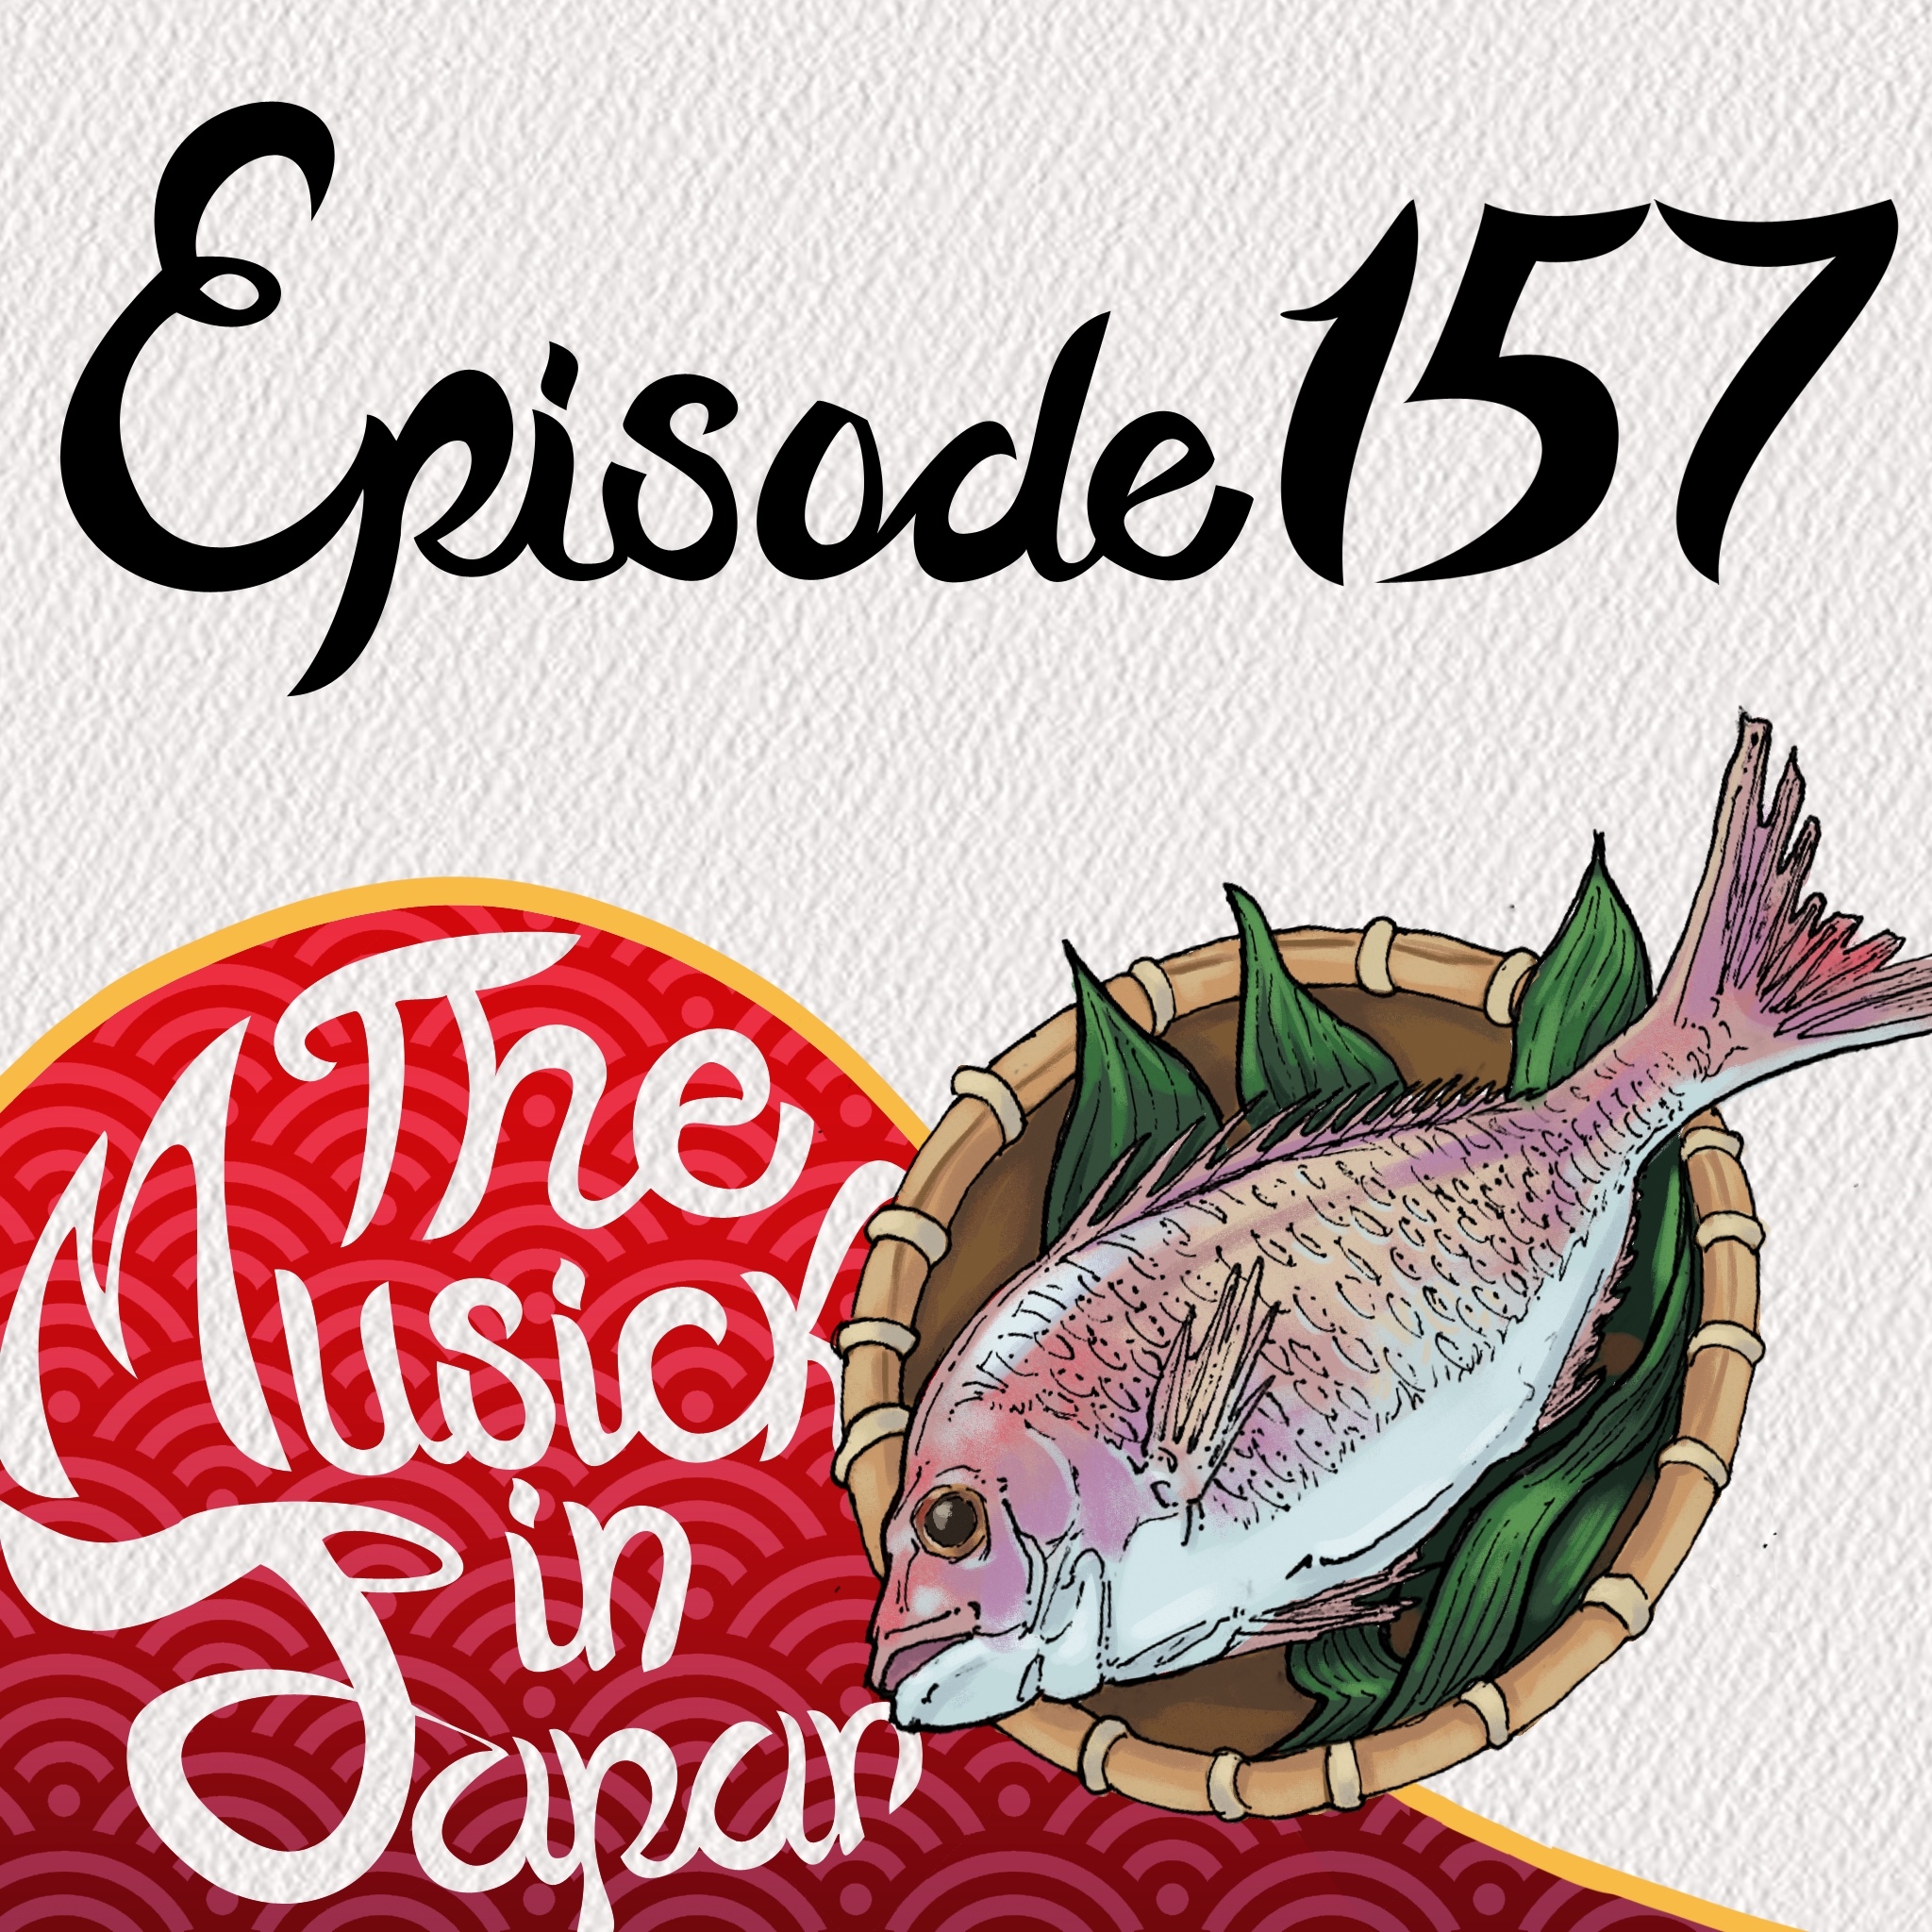 Episode 157: Studying for a PhD in the U.S. vs Japan